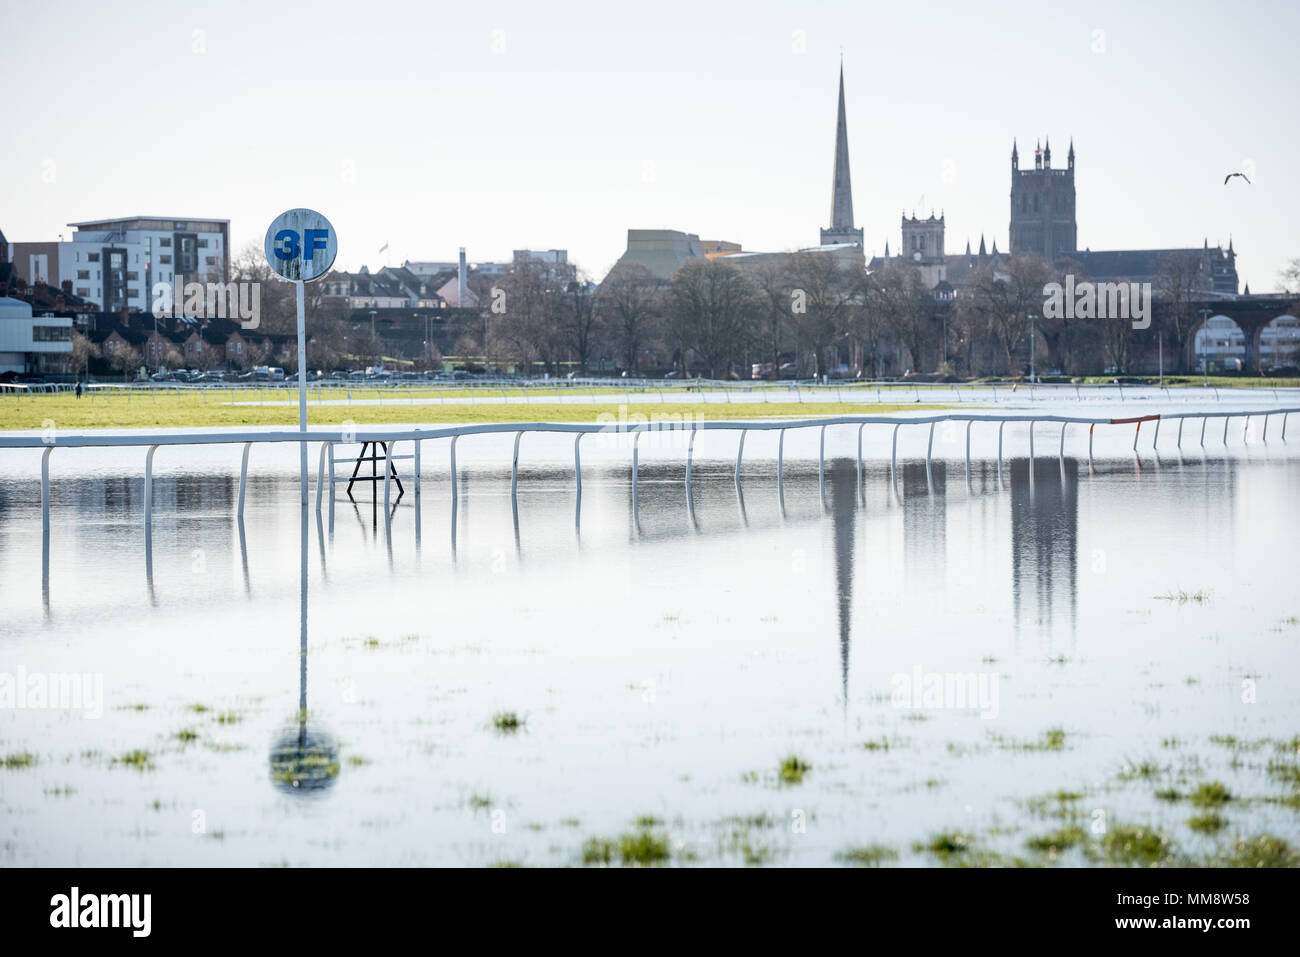 Worcester, Worcestershire, UK. 5th April 2018. Despite a respite in the weather, flood waters remain high in Worcester with the race course and county Stock Photo